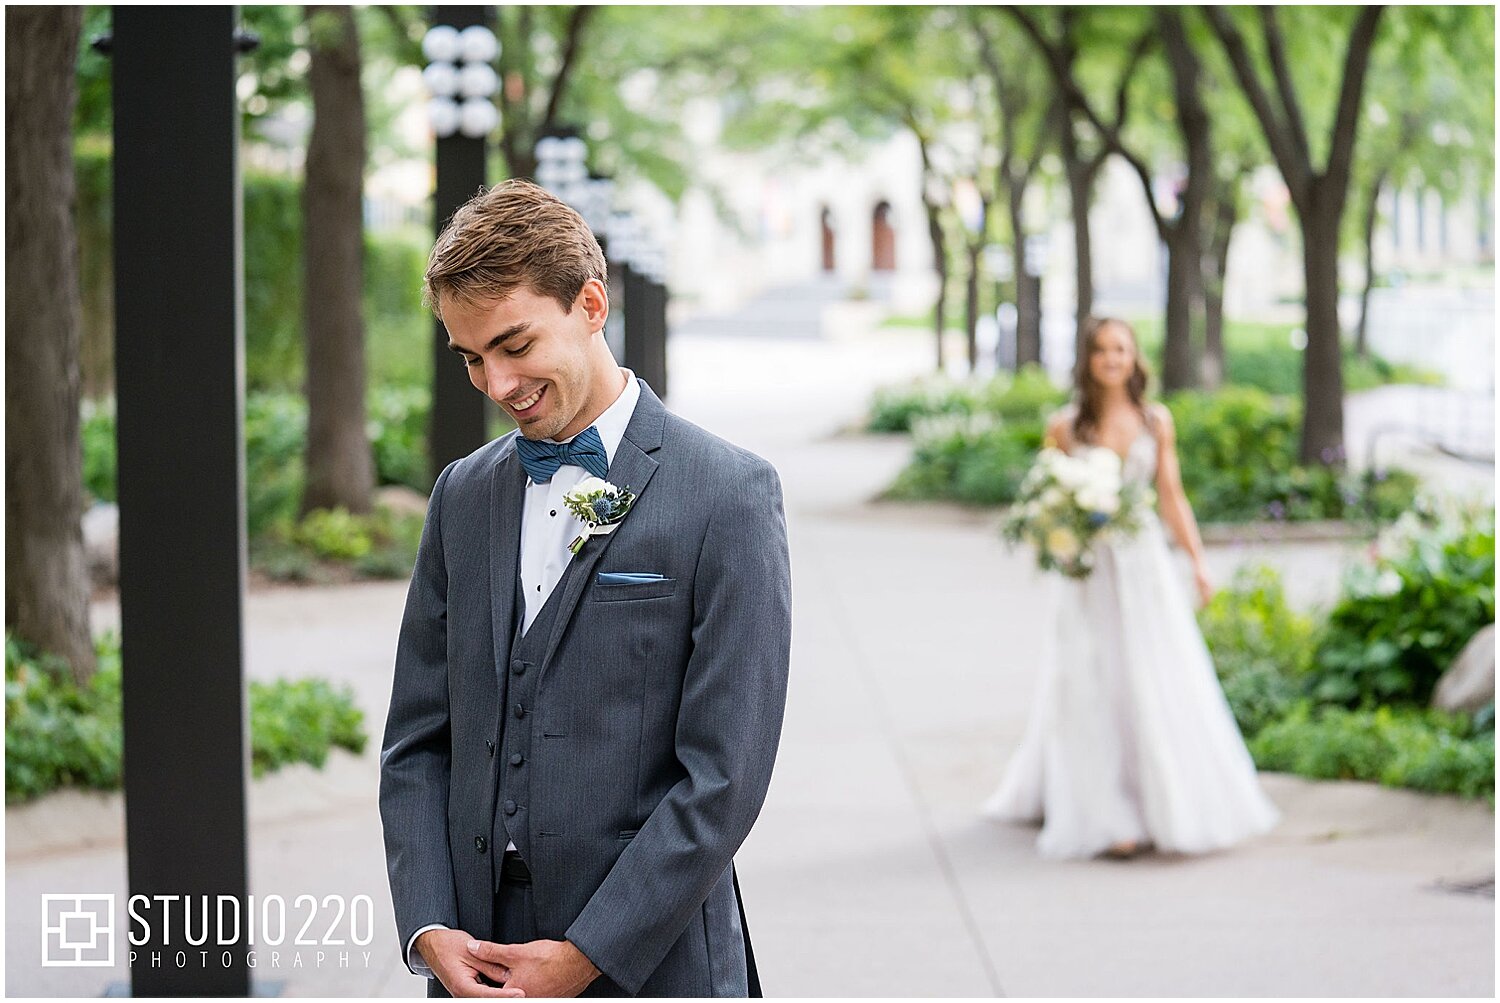  Bride and groom’s first look before their wedding ceremony  